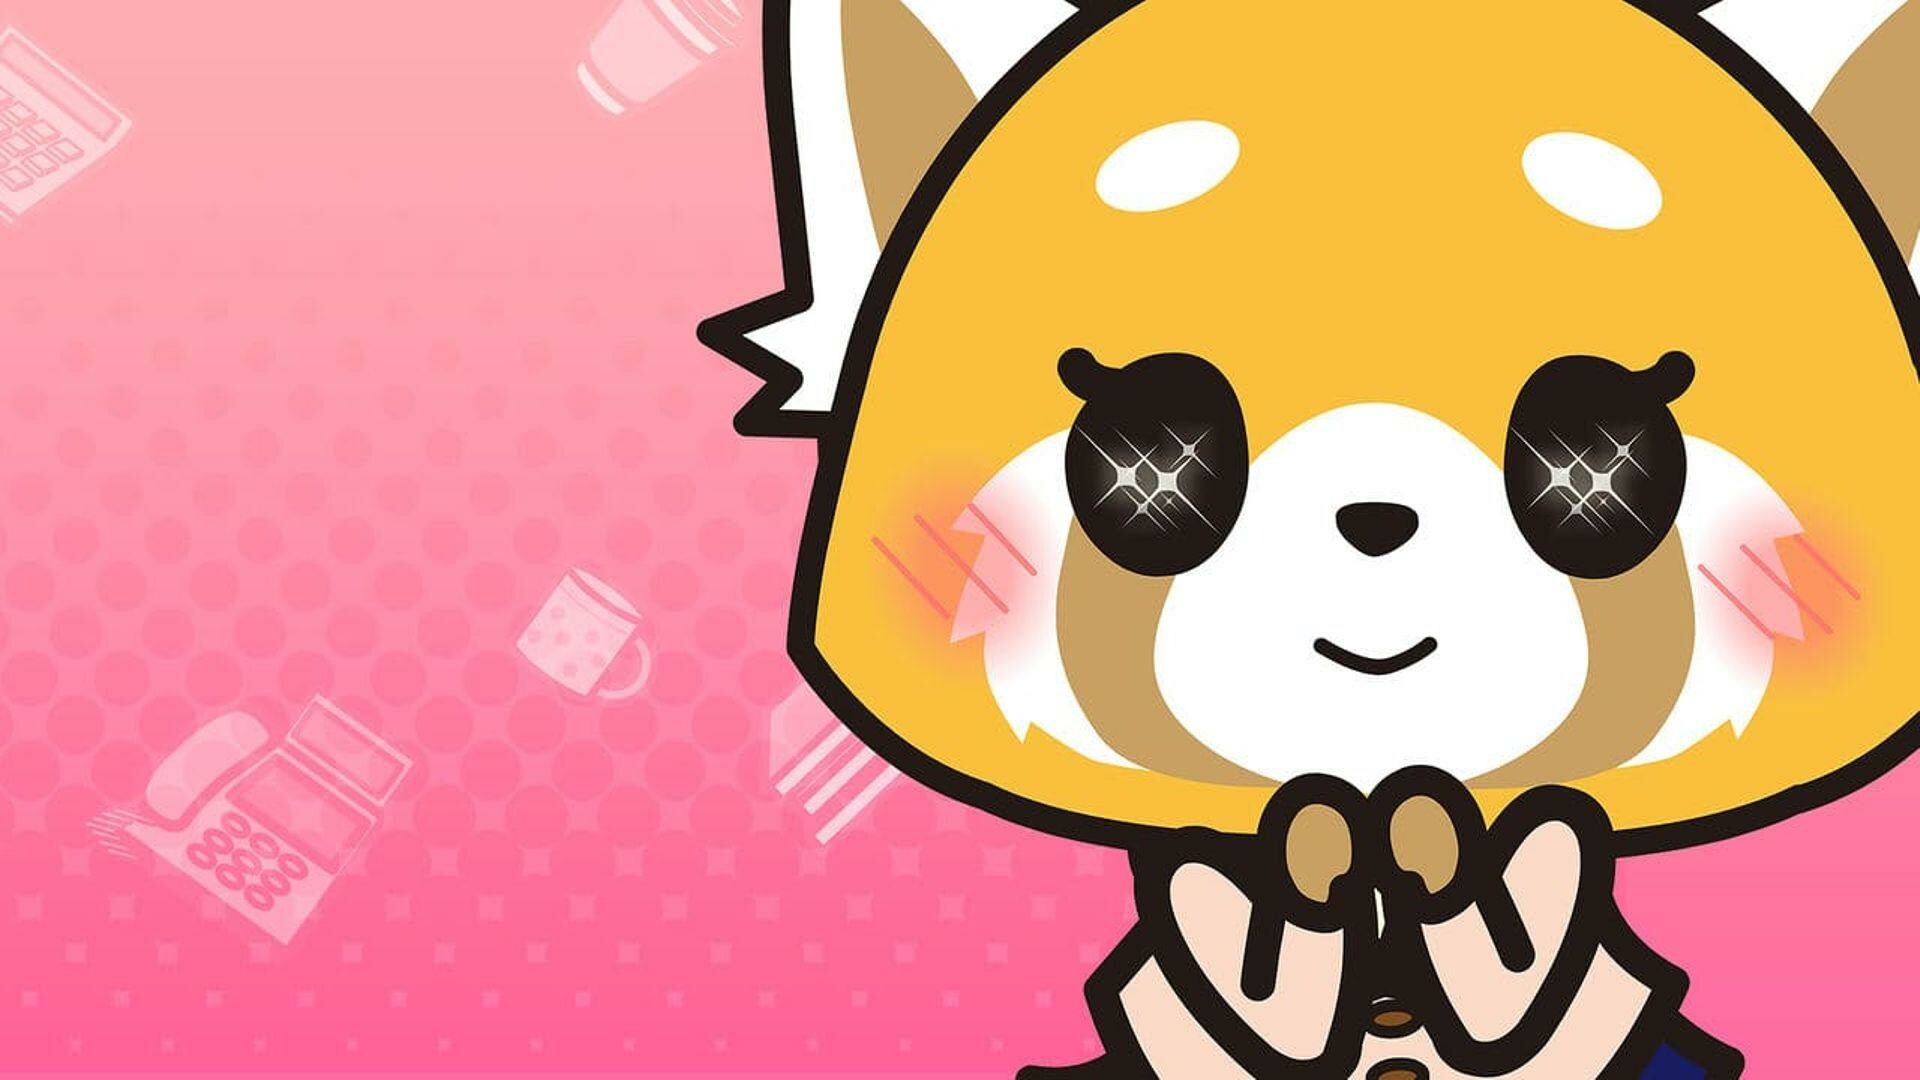 Aggretsuko: A second season which was released on June 14, 2019. 1920x1080 Full HD Wallpaper.